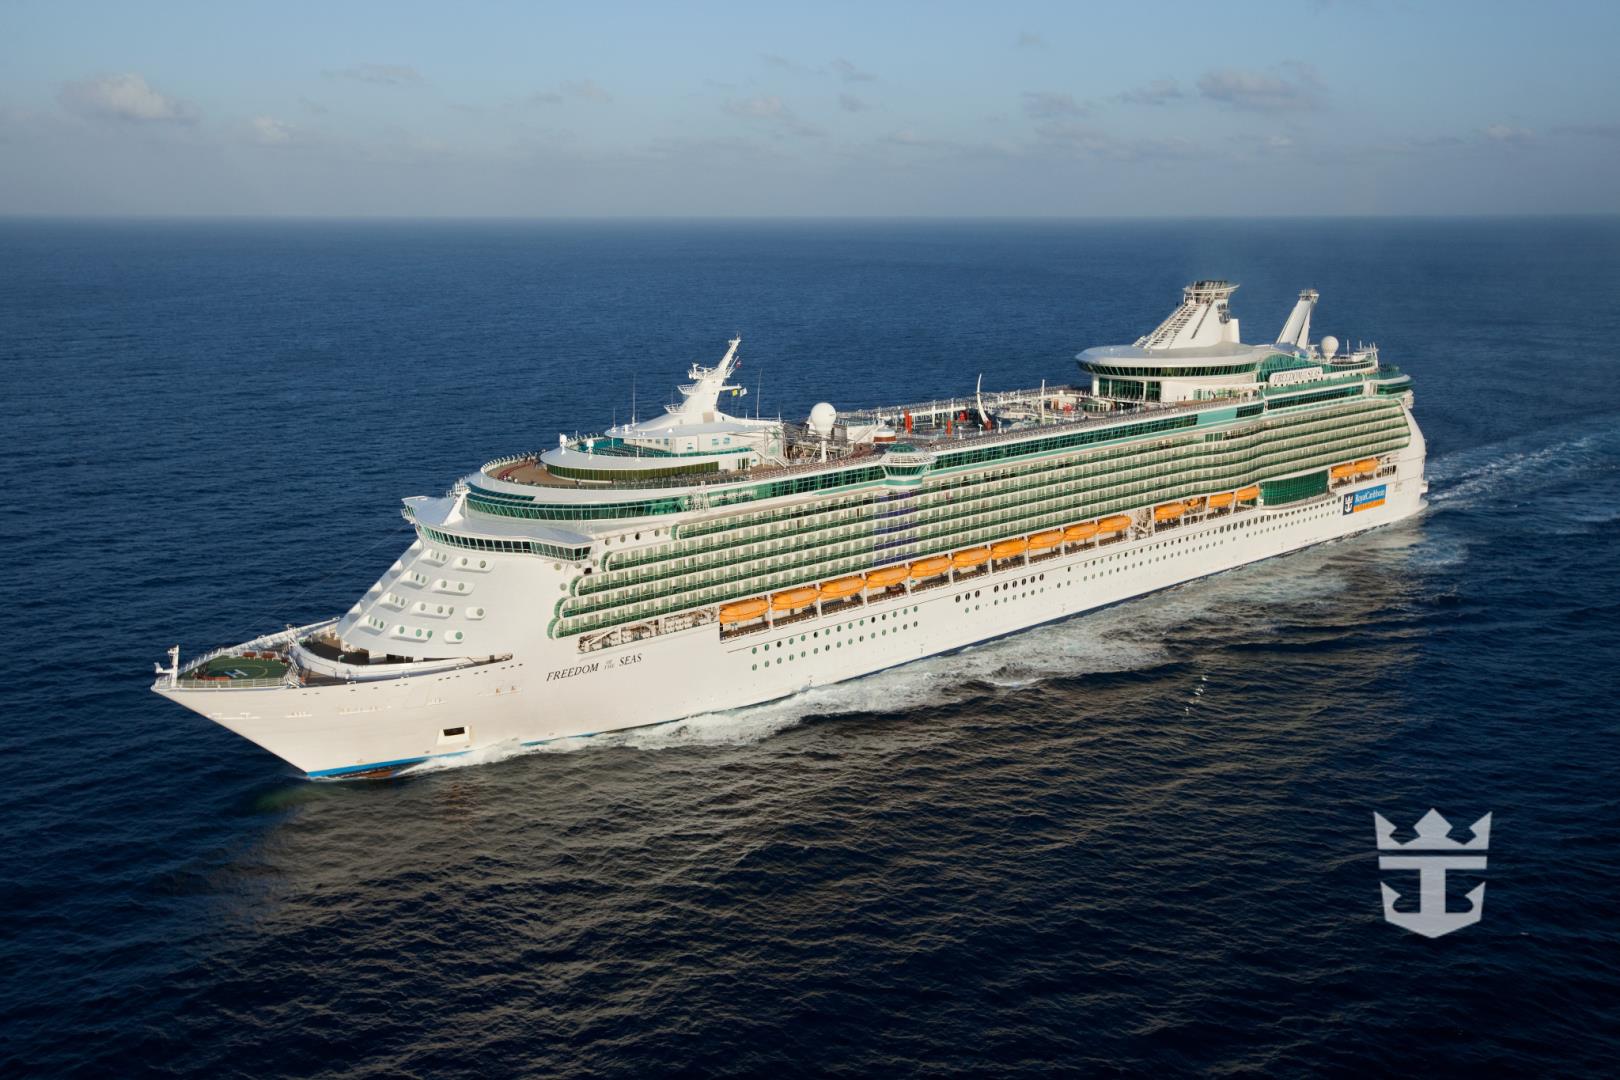 Aerial of Freedom of the Seas